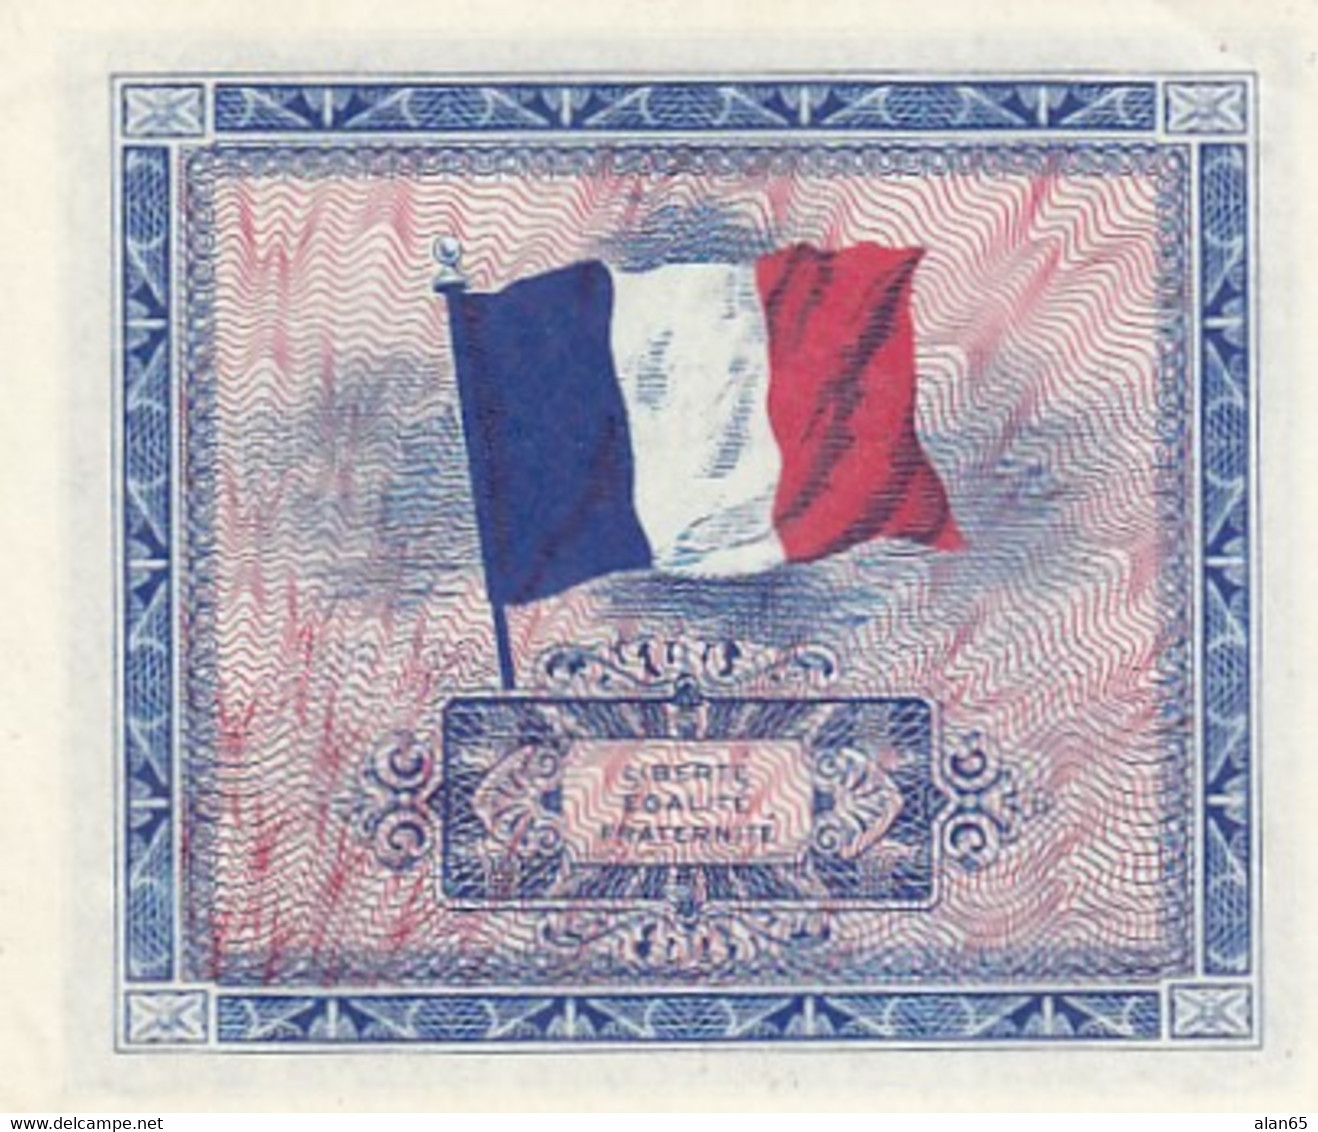 France #114a 2 Francs 1944  Banknote, Allied Military Currency - 1944 Flagge/Frankreich